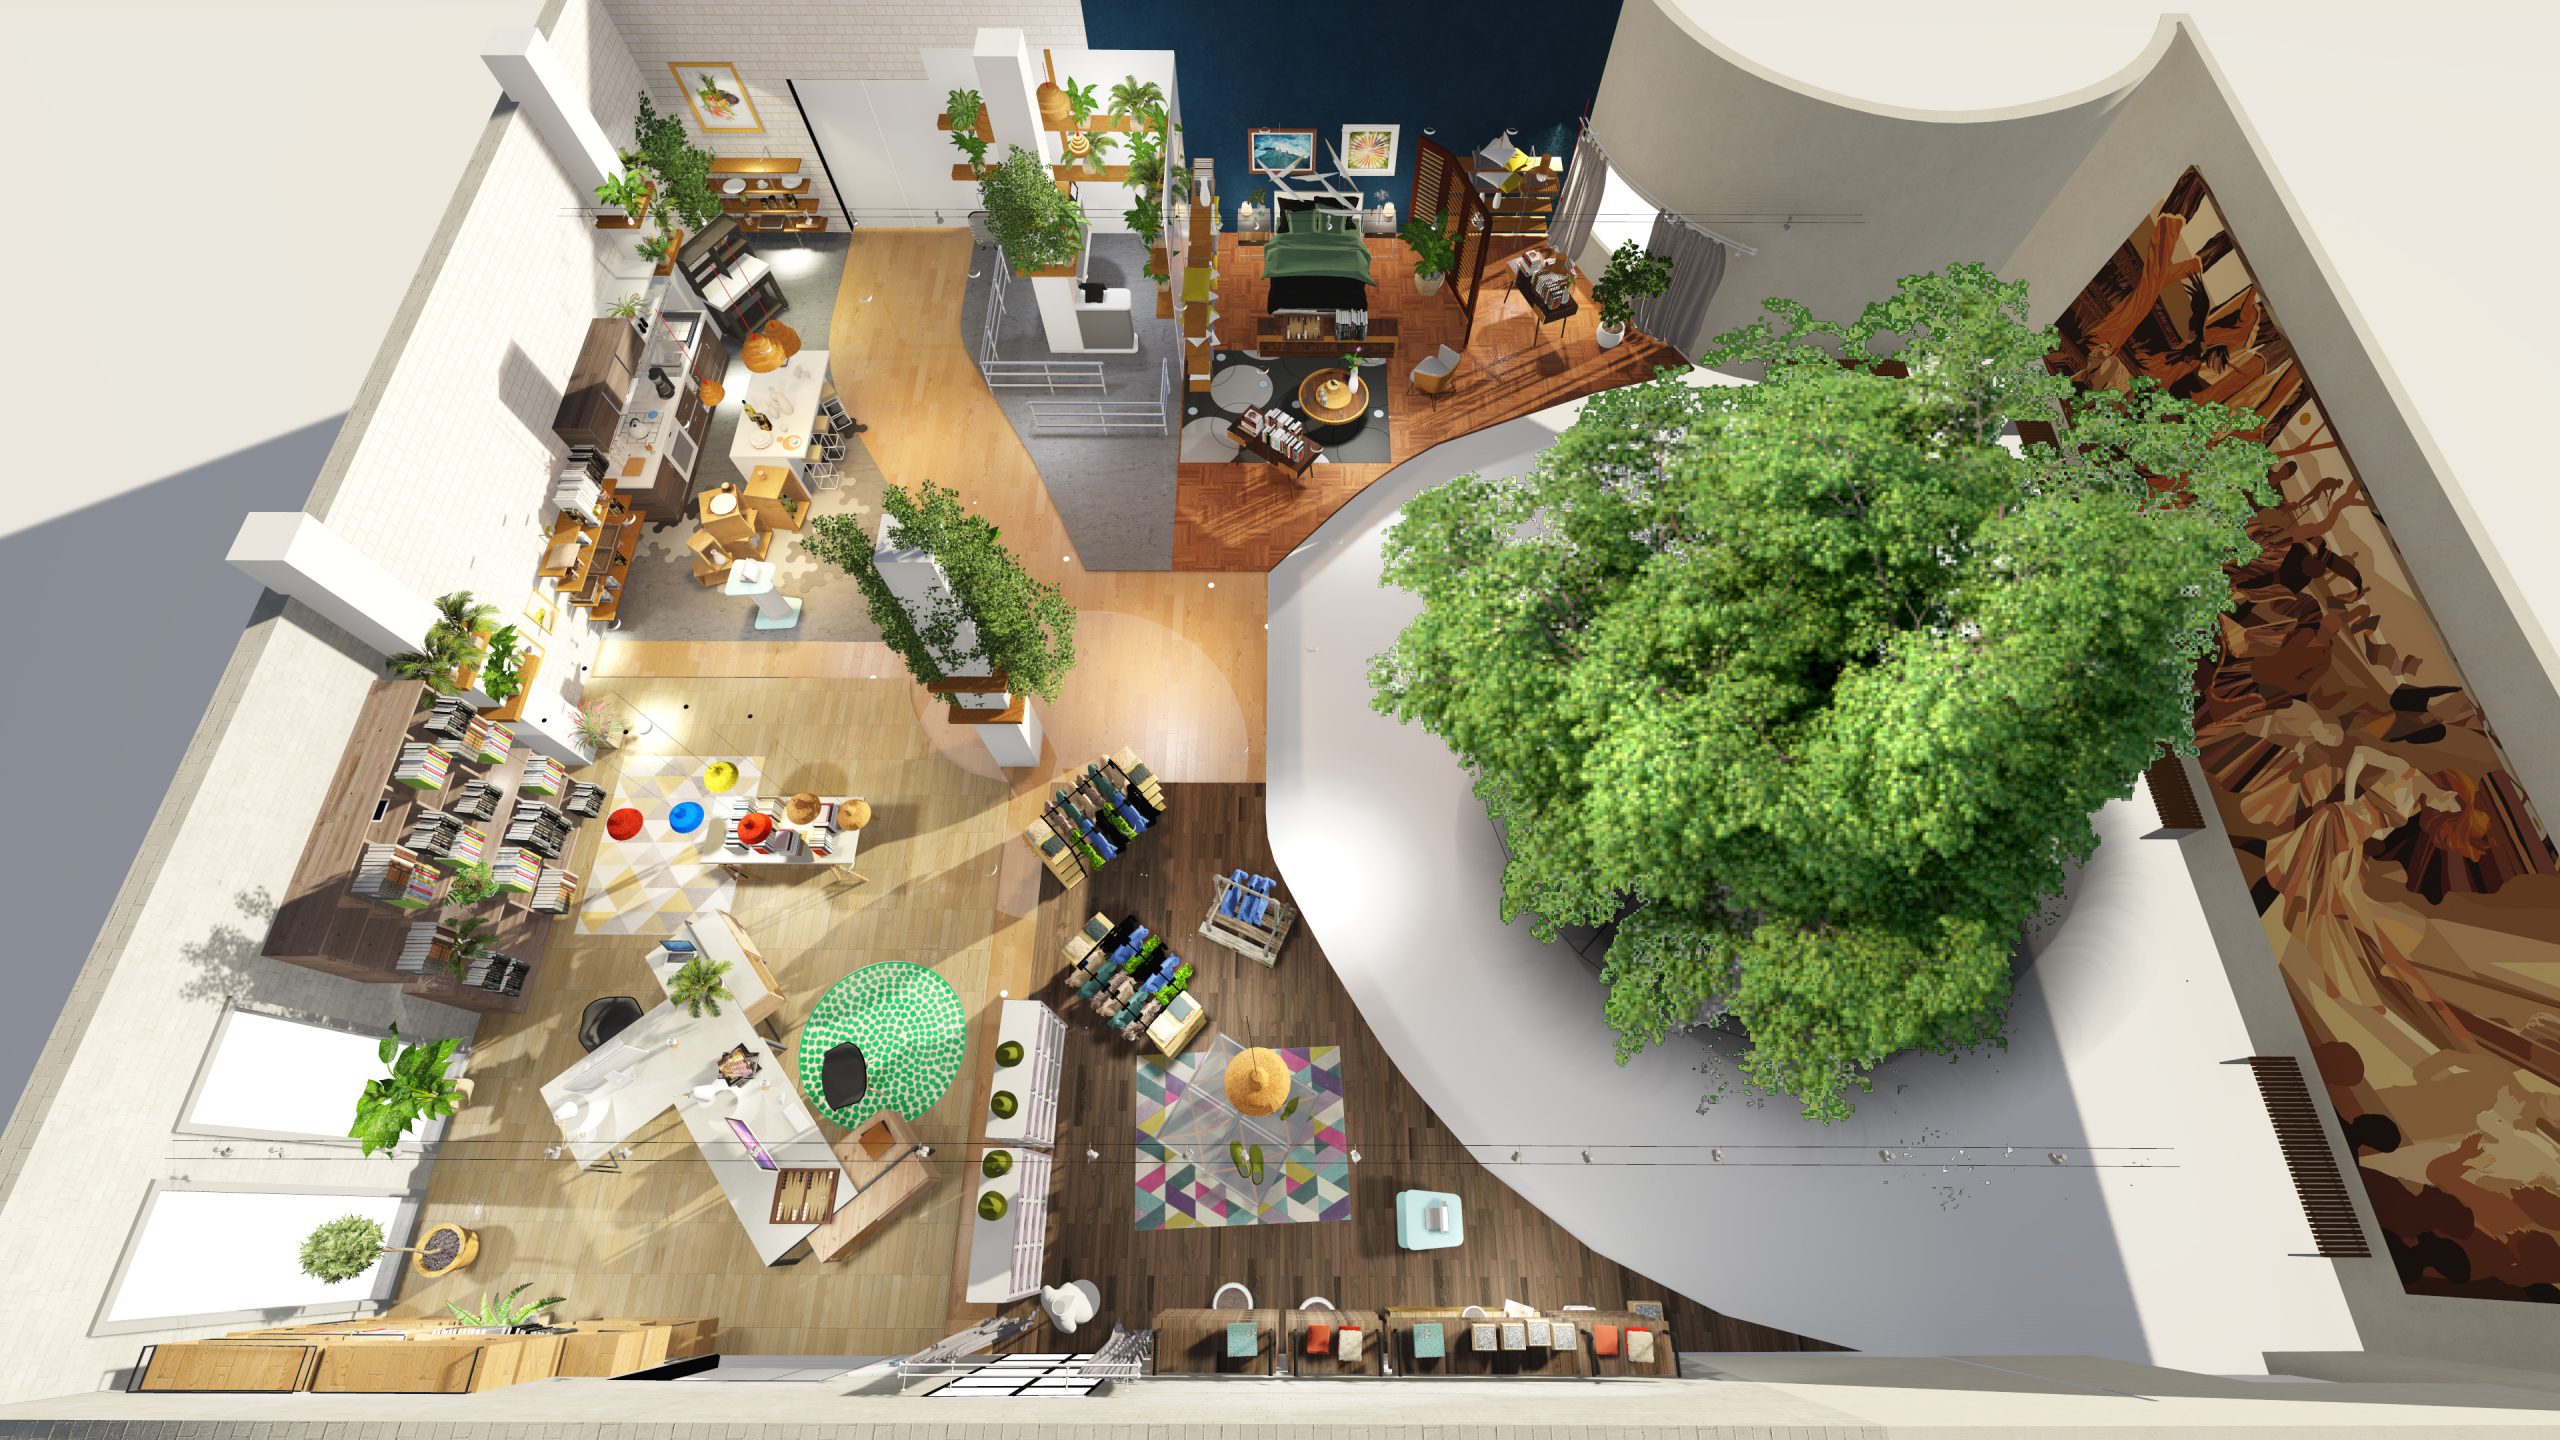 An overview concept image of an area with trees, bookcases and a kitchen area